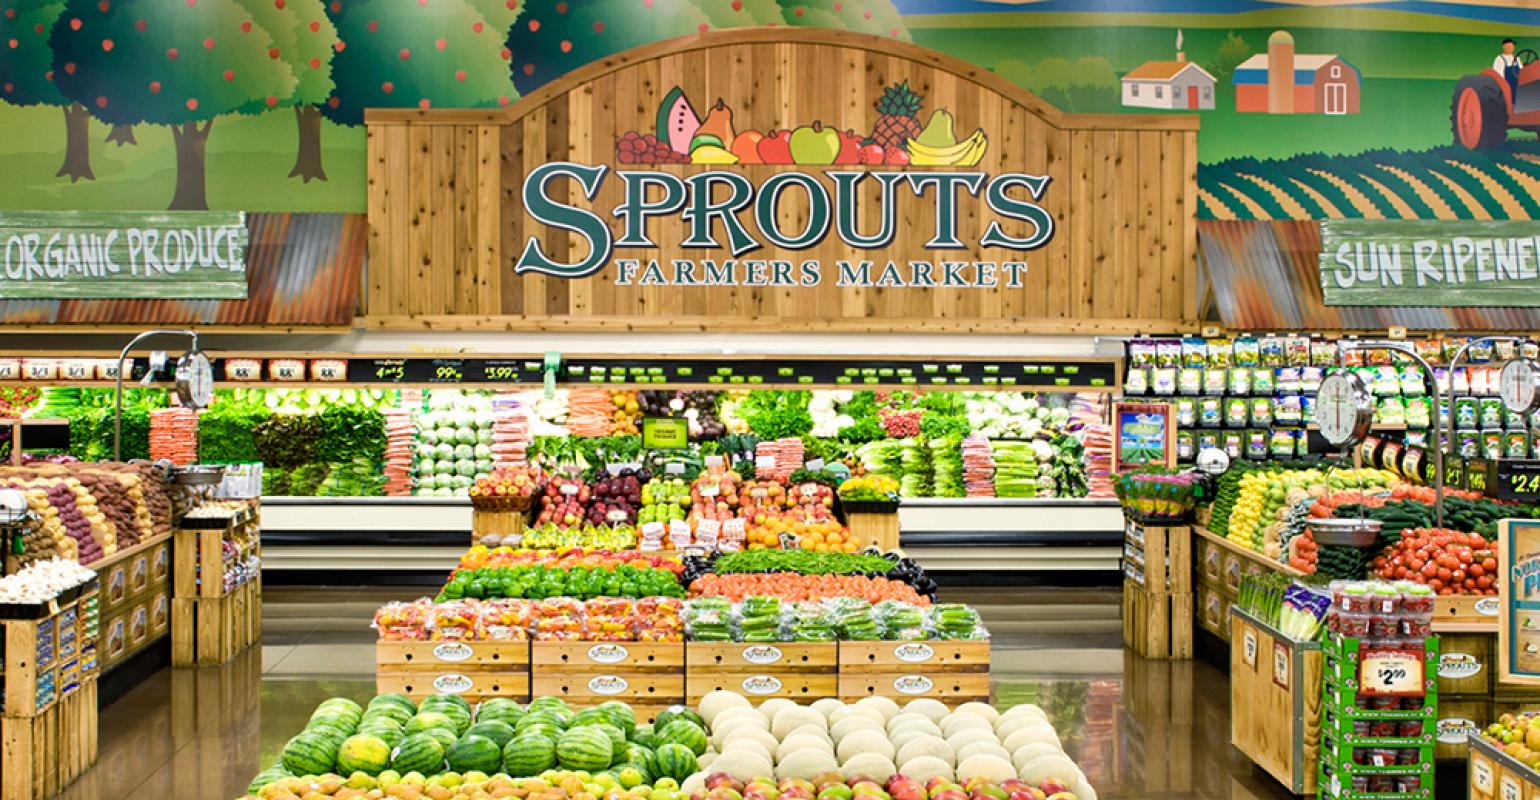 Sprouts may be eyeing new regions Supermarket News